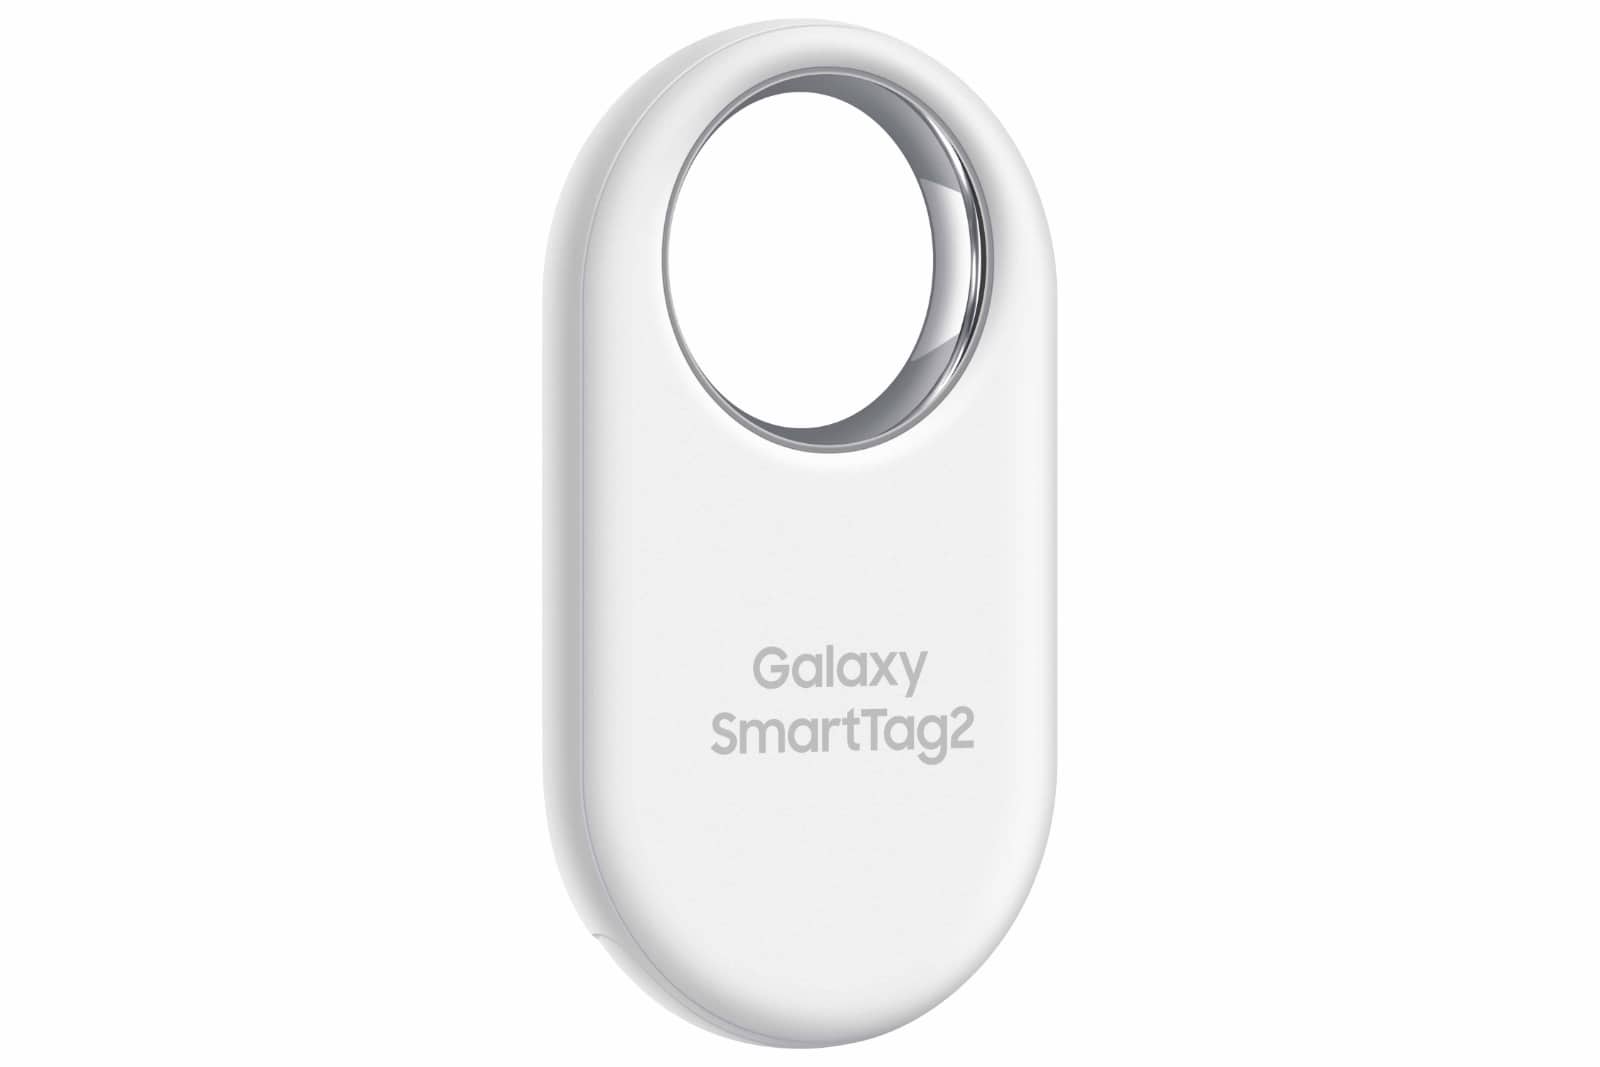 Galaxy SmartTag2 - Samsung's smart tracking tag lands in Australia